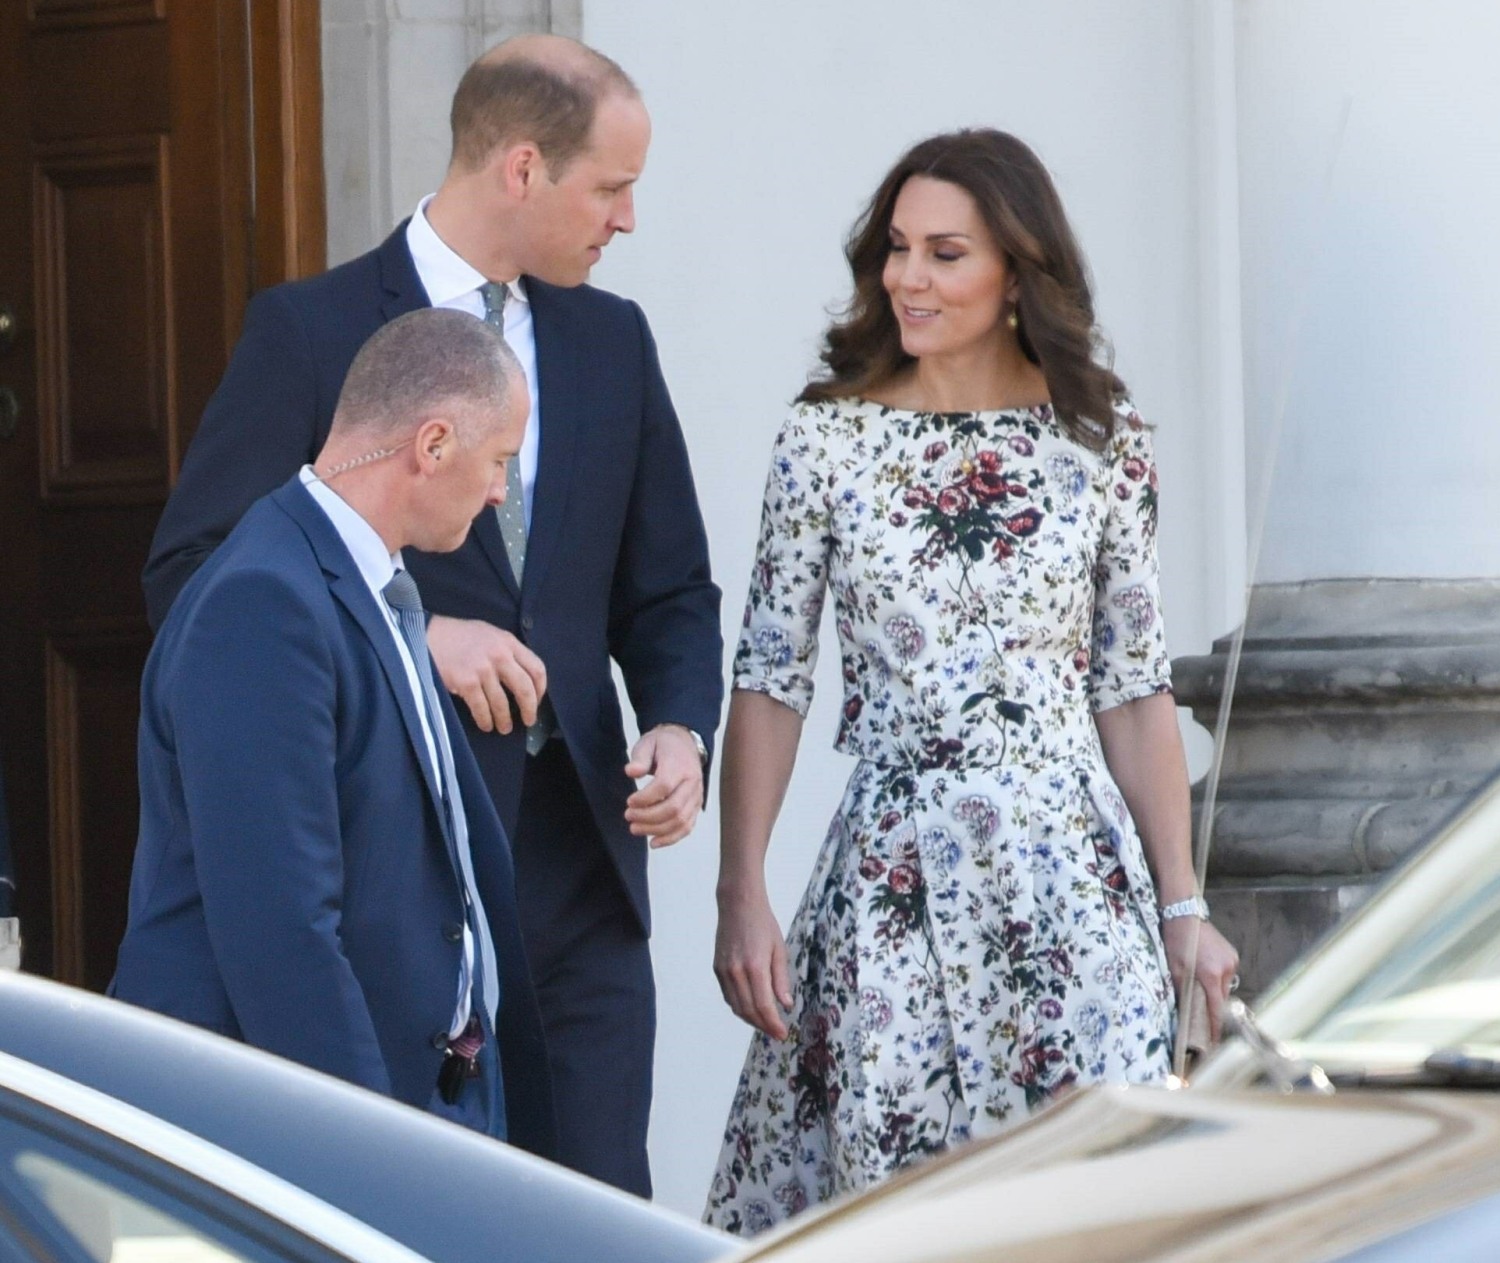 Kate Middleton and Prince William attend an event in Poland